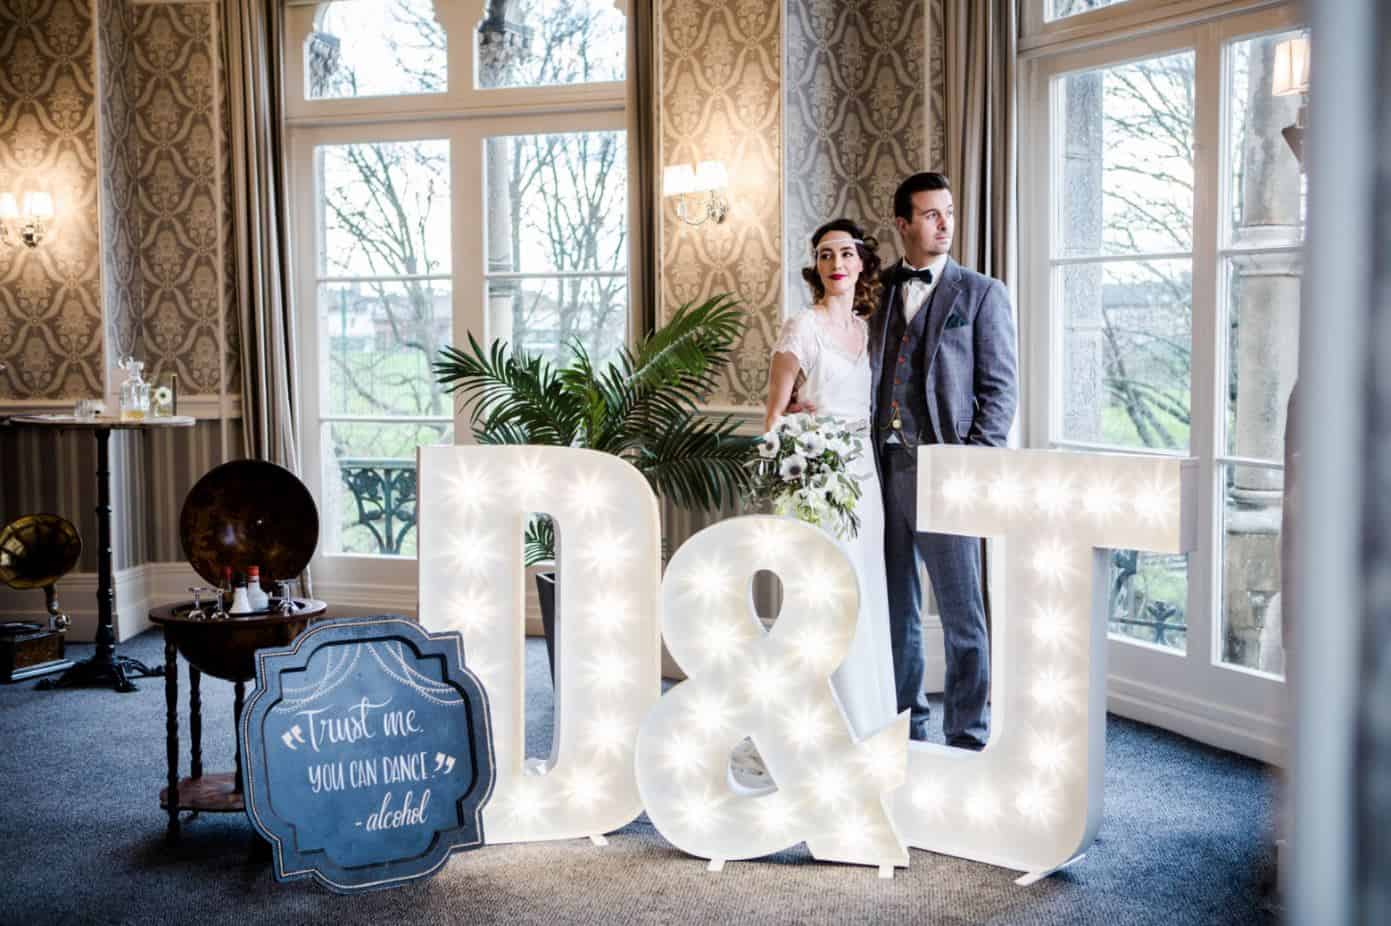 Bride and groom standing with wedding props, including lighted letters and a vintage sign